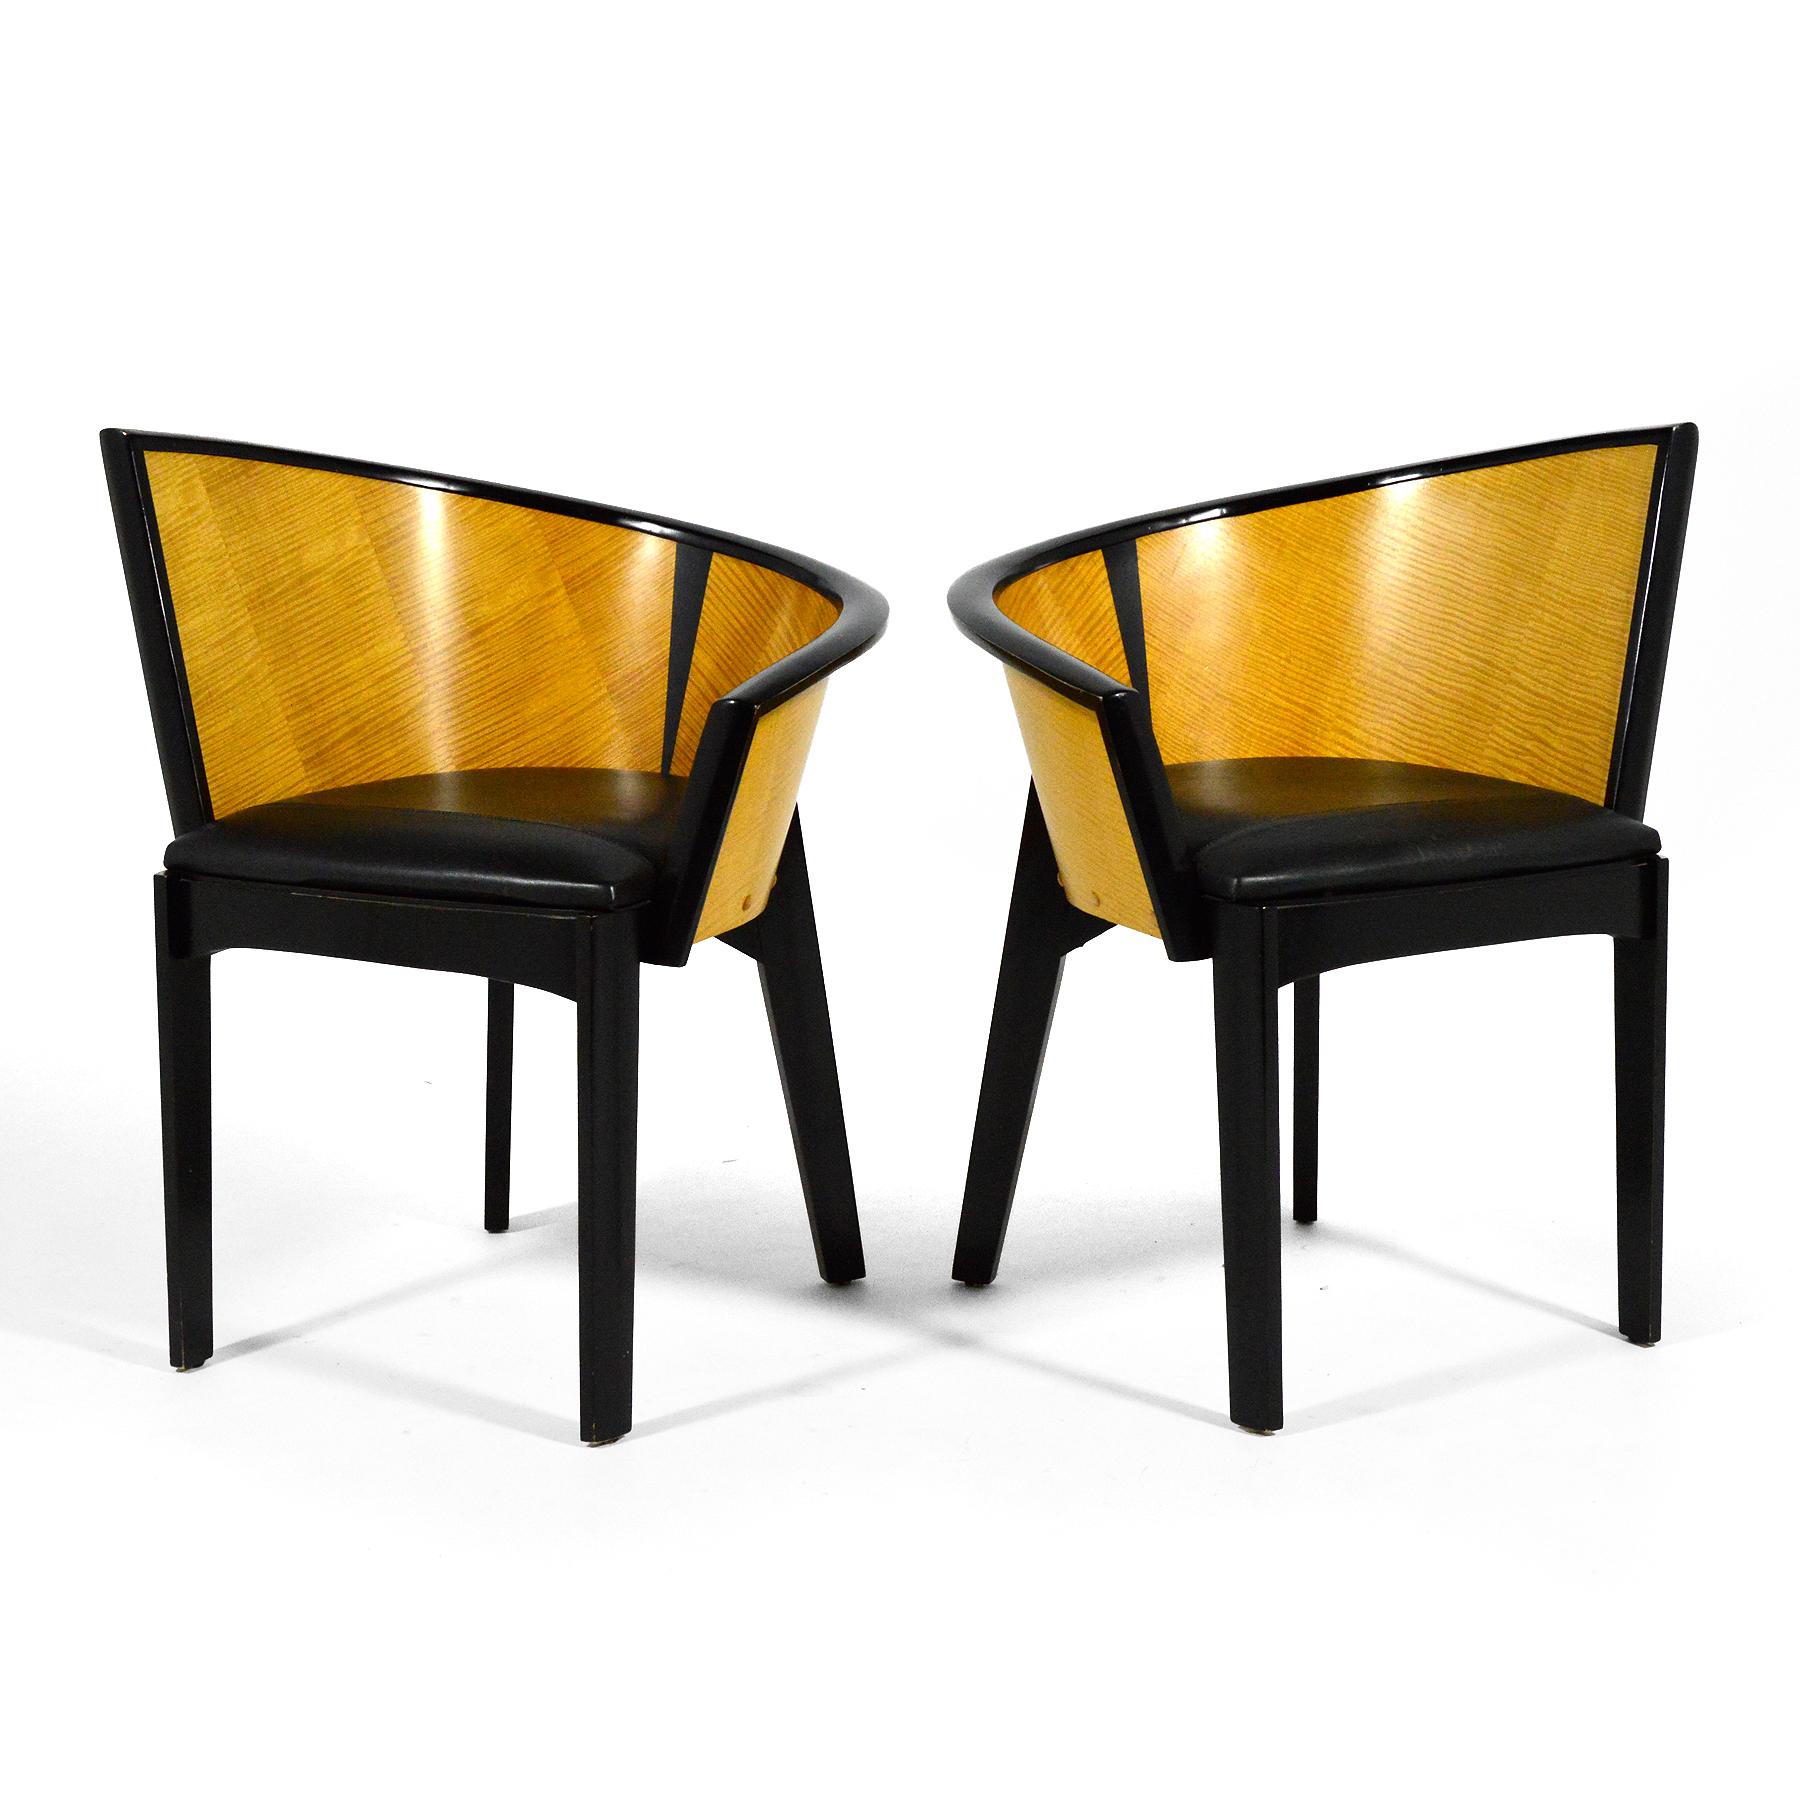 Post-Modern Paul Haigh Sinistra Chairs by Bernhardt For Sale